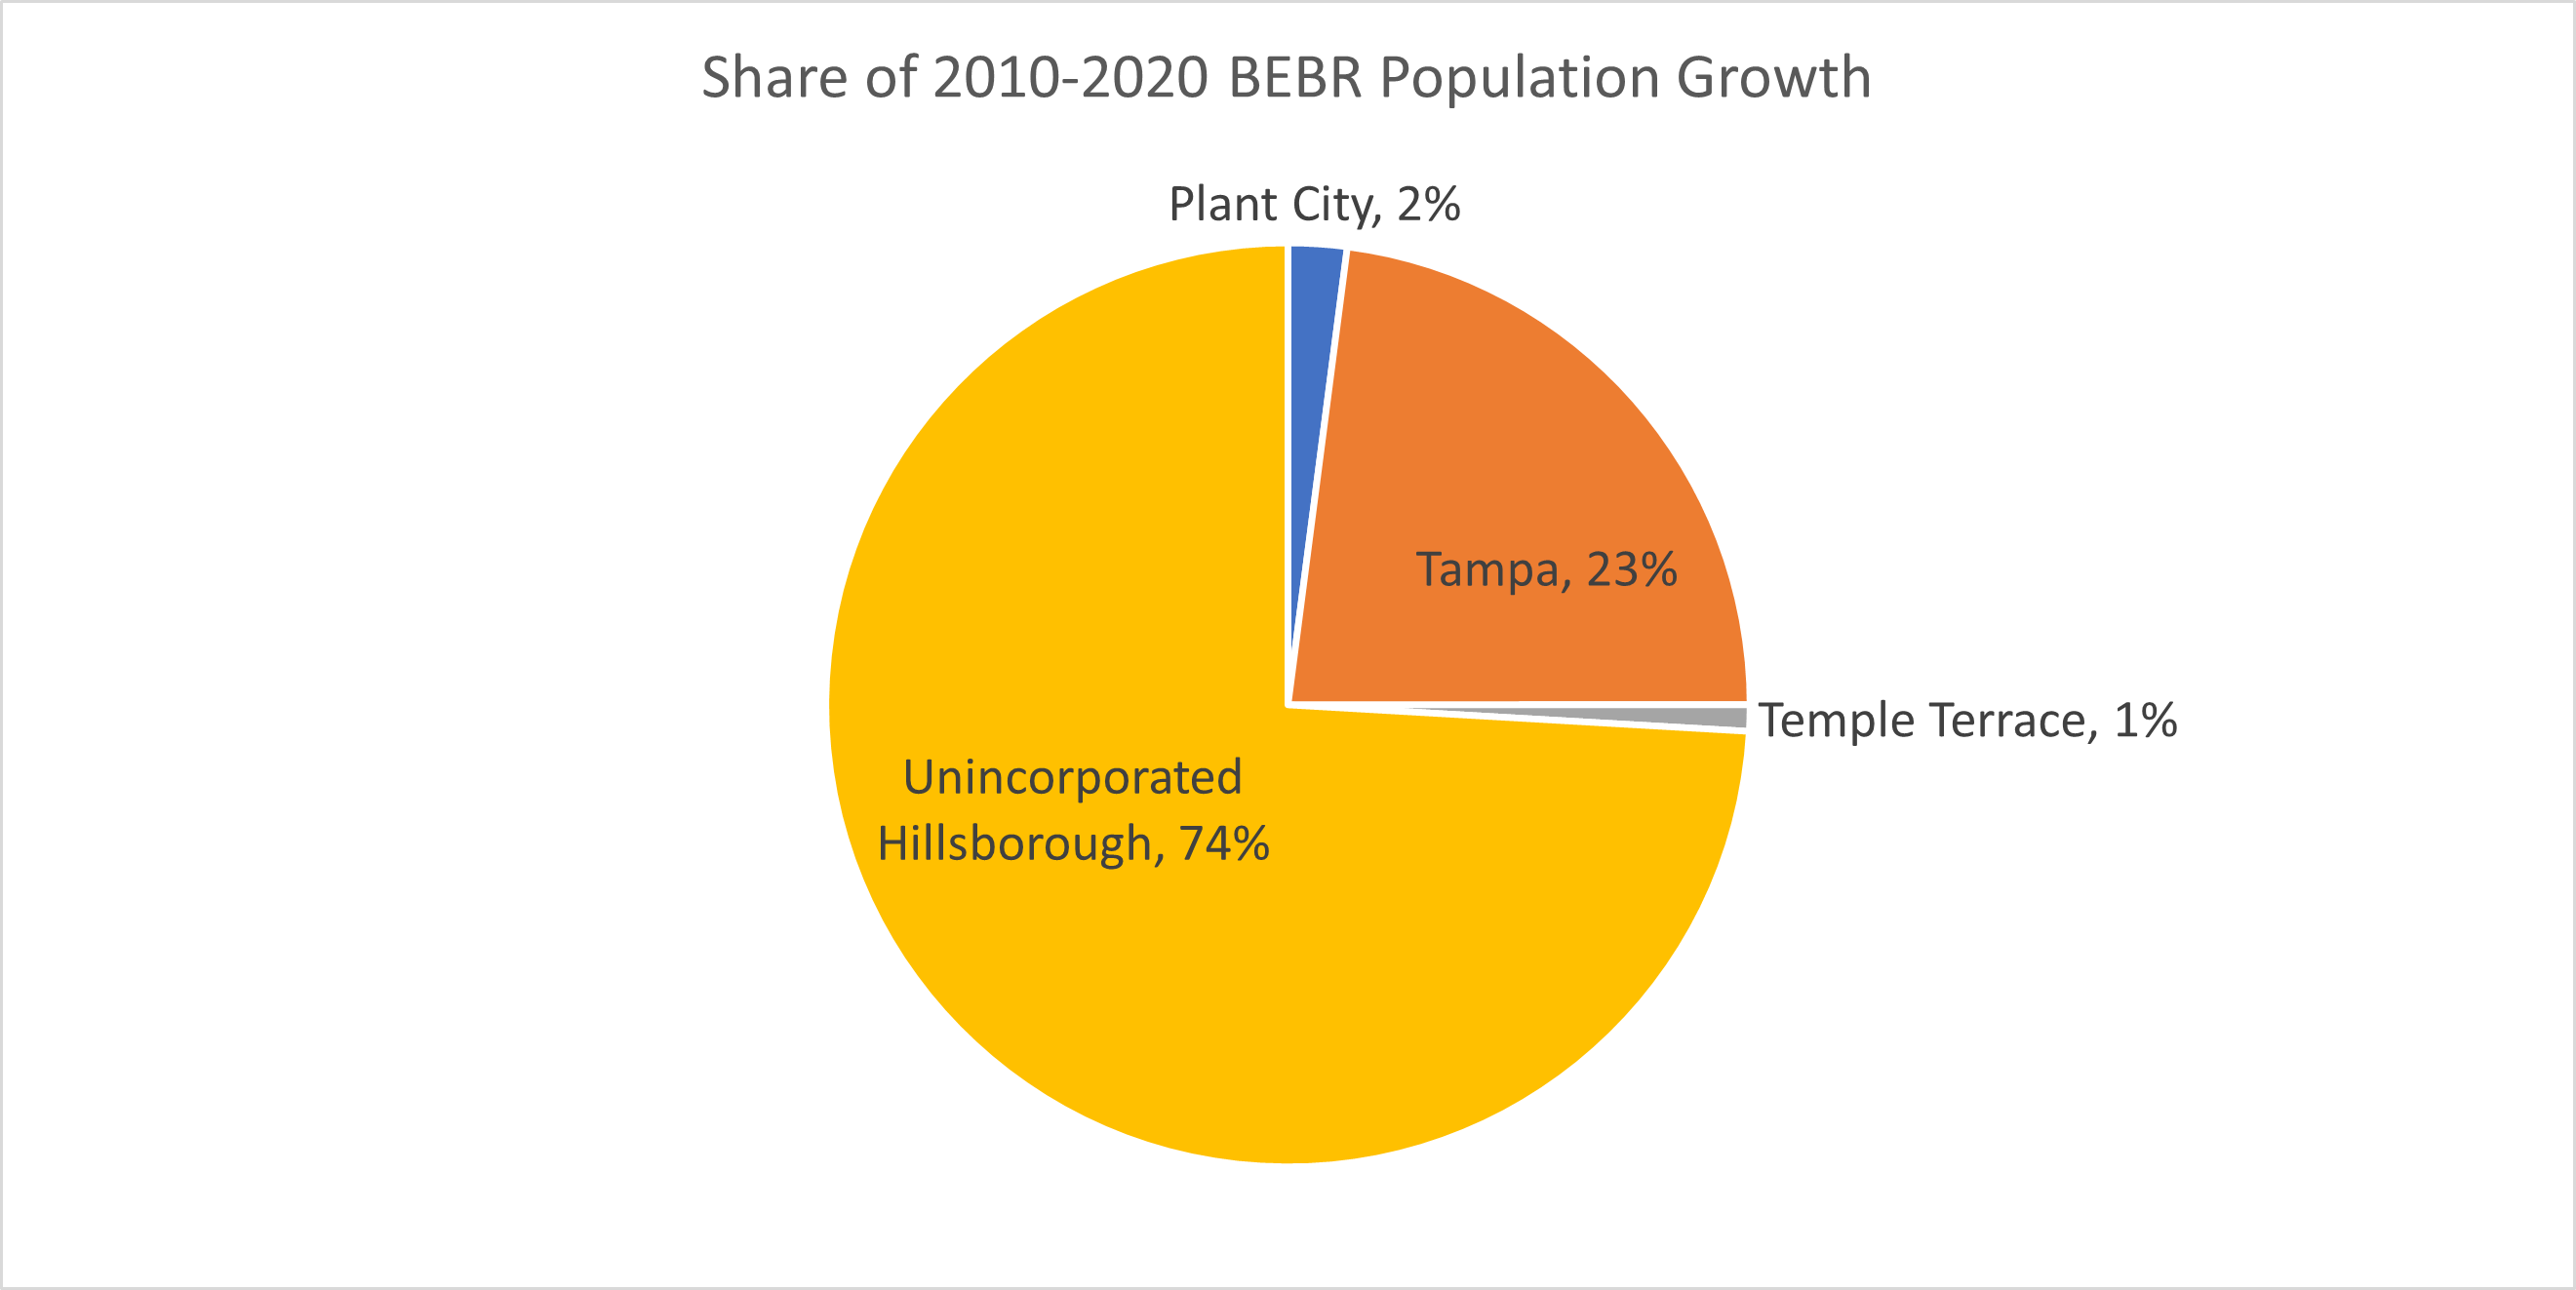 BEBR population growth by jurisdiction.  Unincorporated Hillsborough County captured 74% of the 2010-2020 population growth.  Meanwhile, Tampa captured 23%.